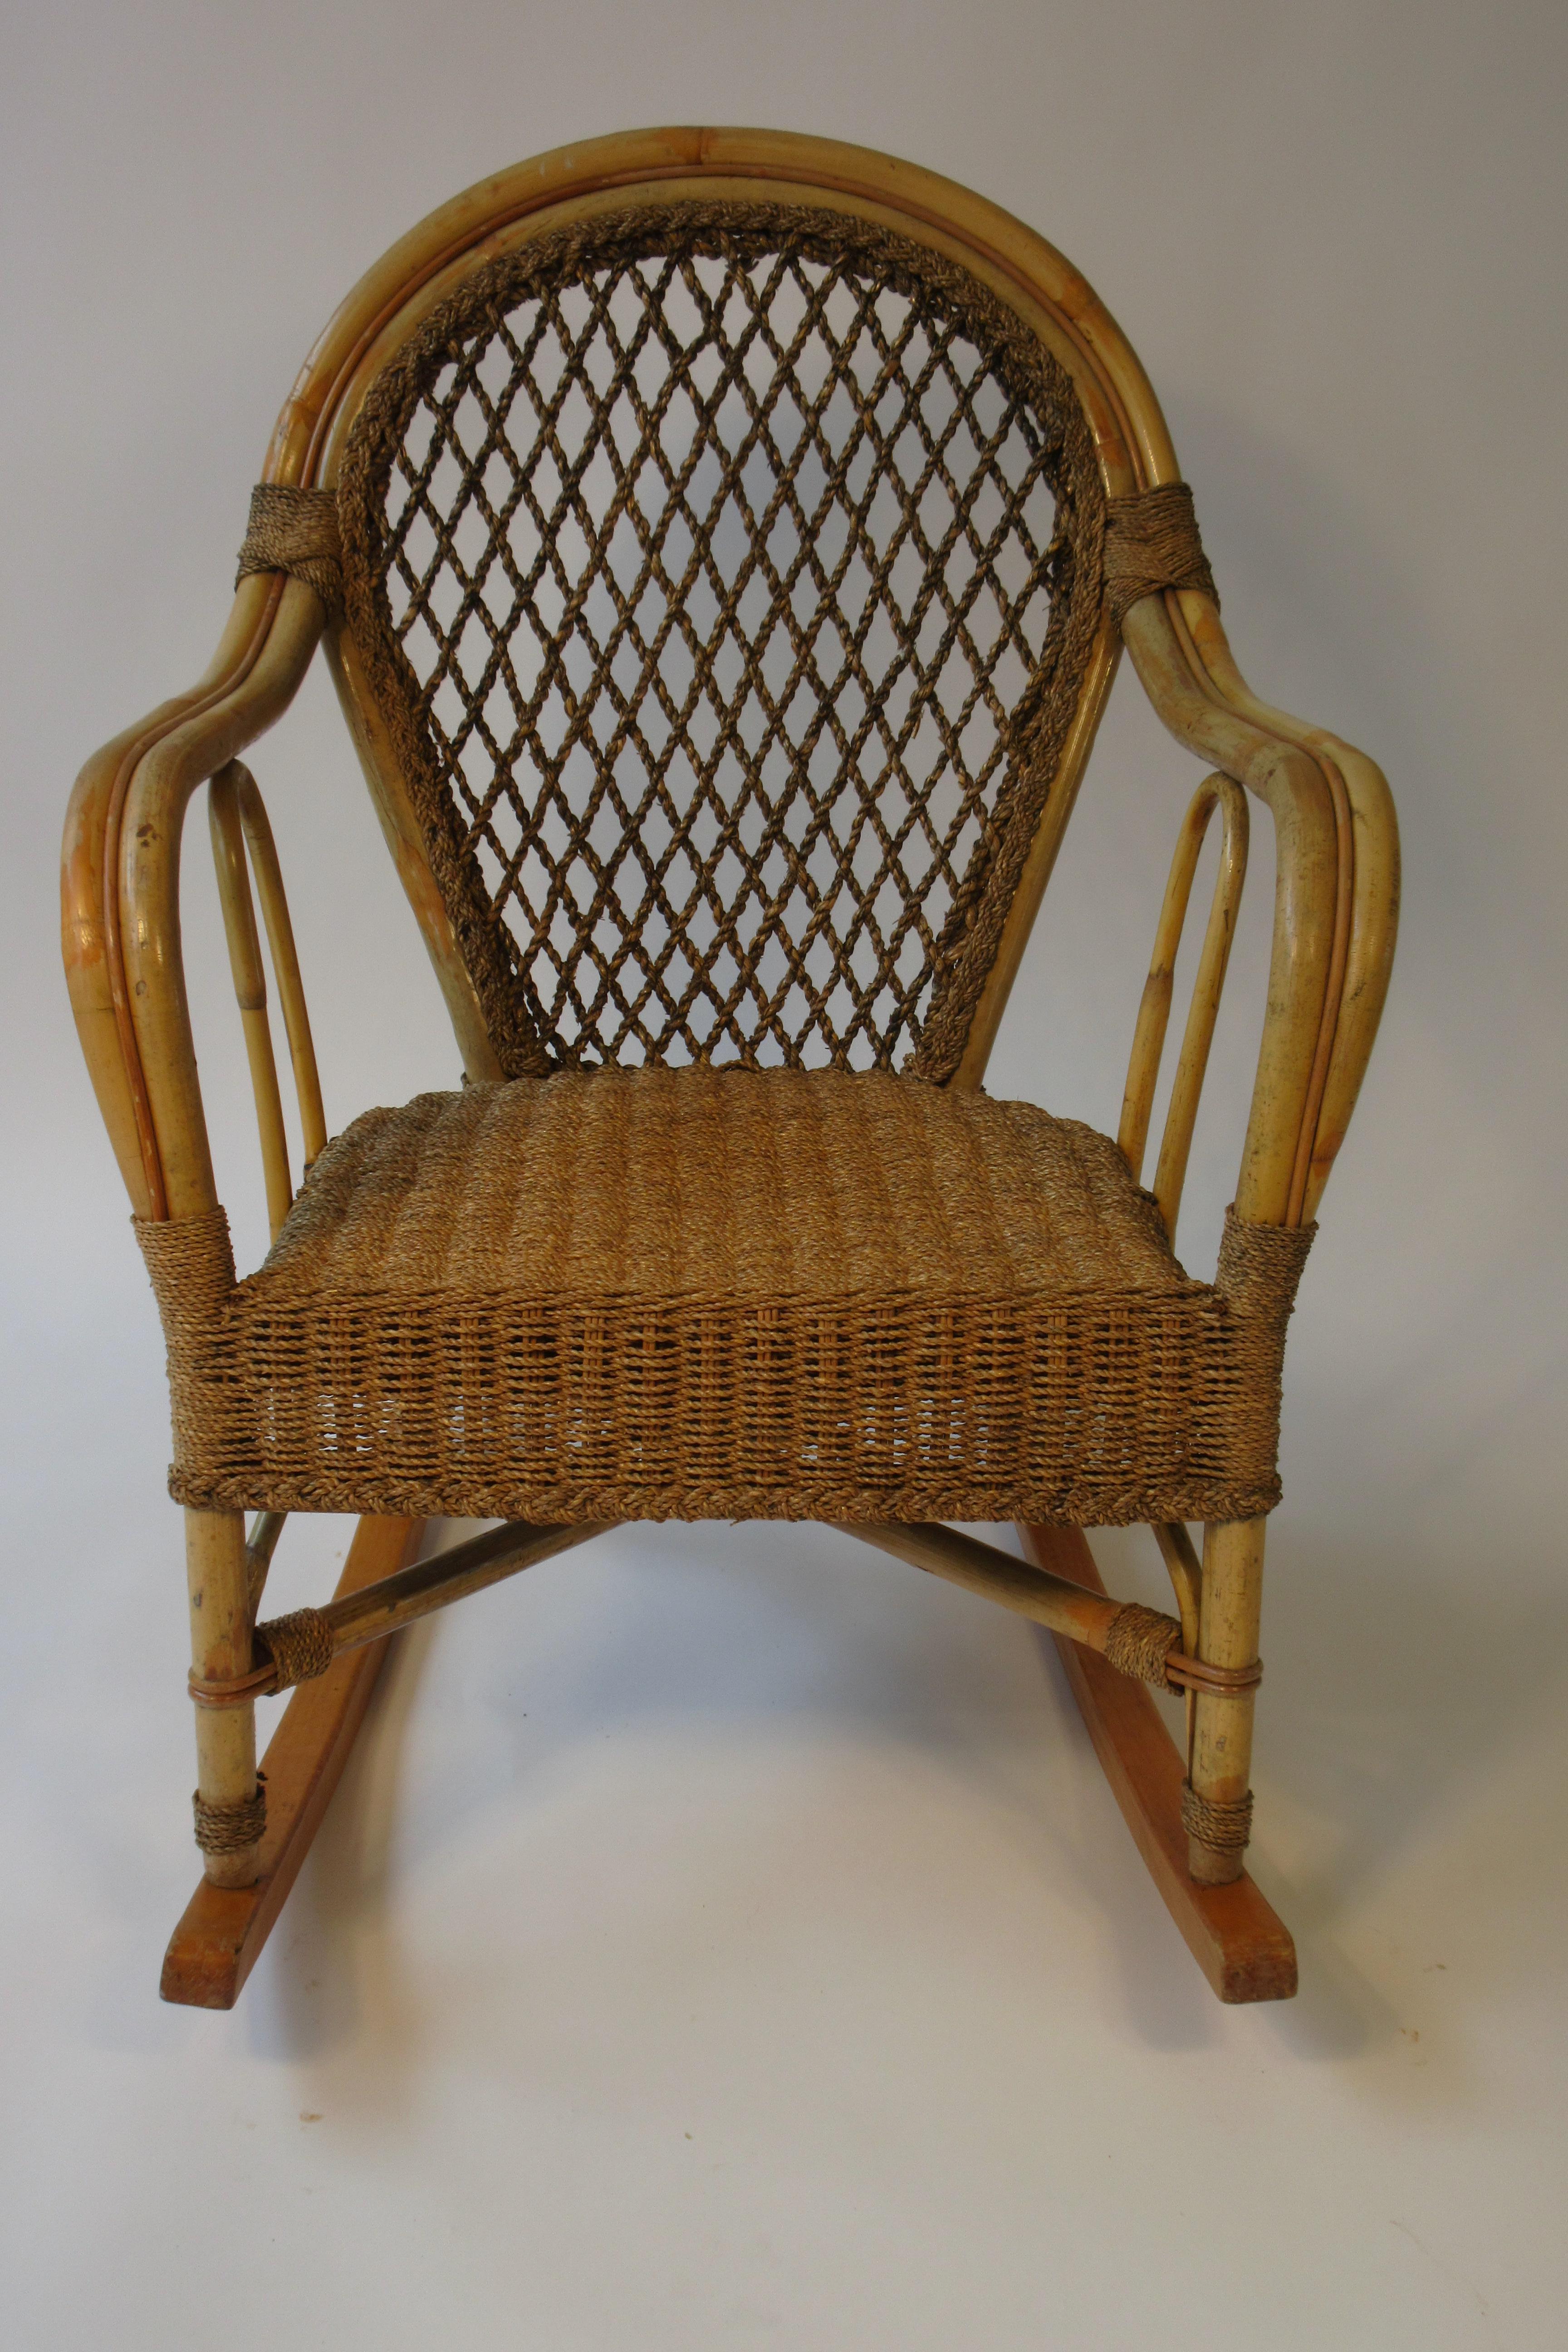 1940s rope and wood rocker.